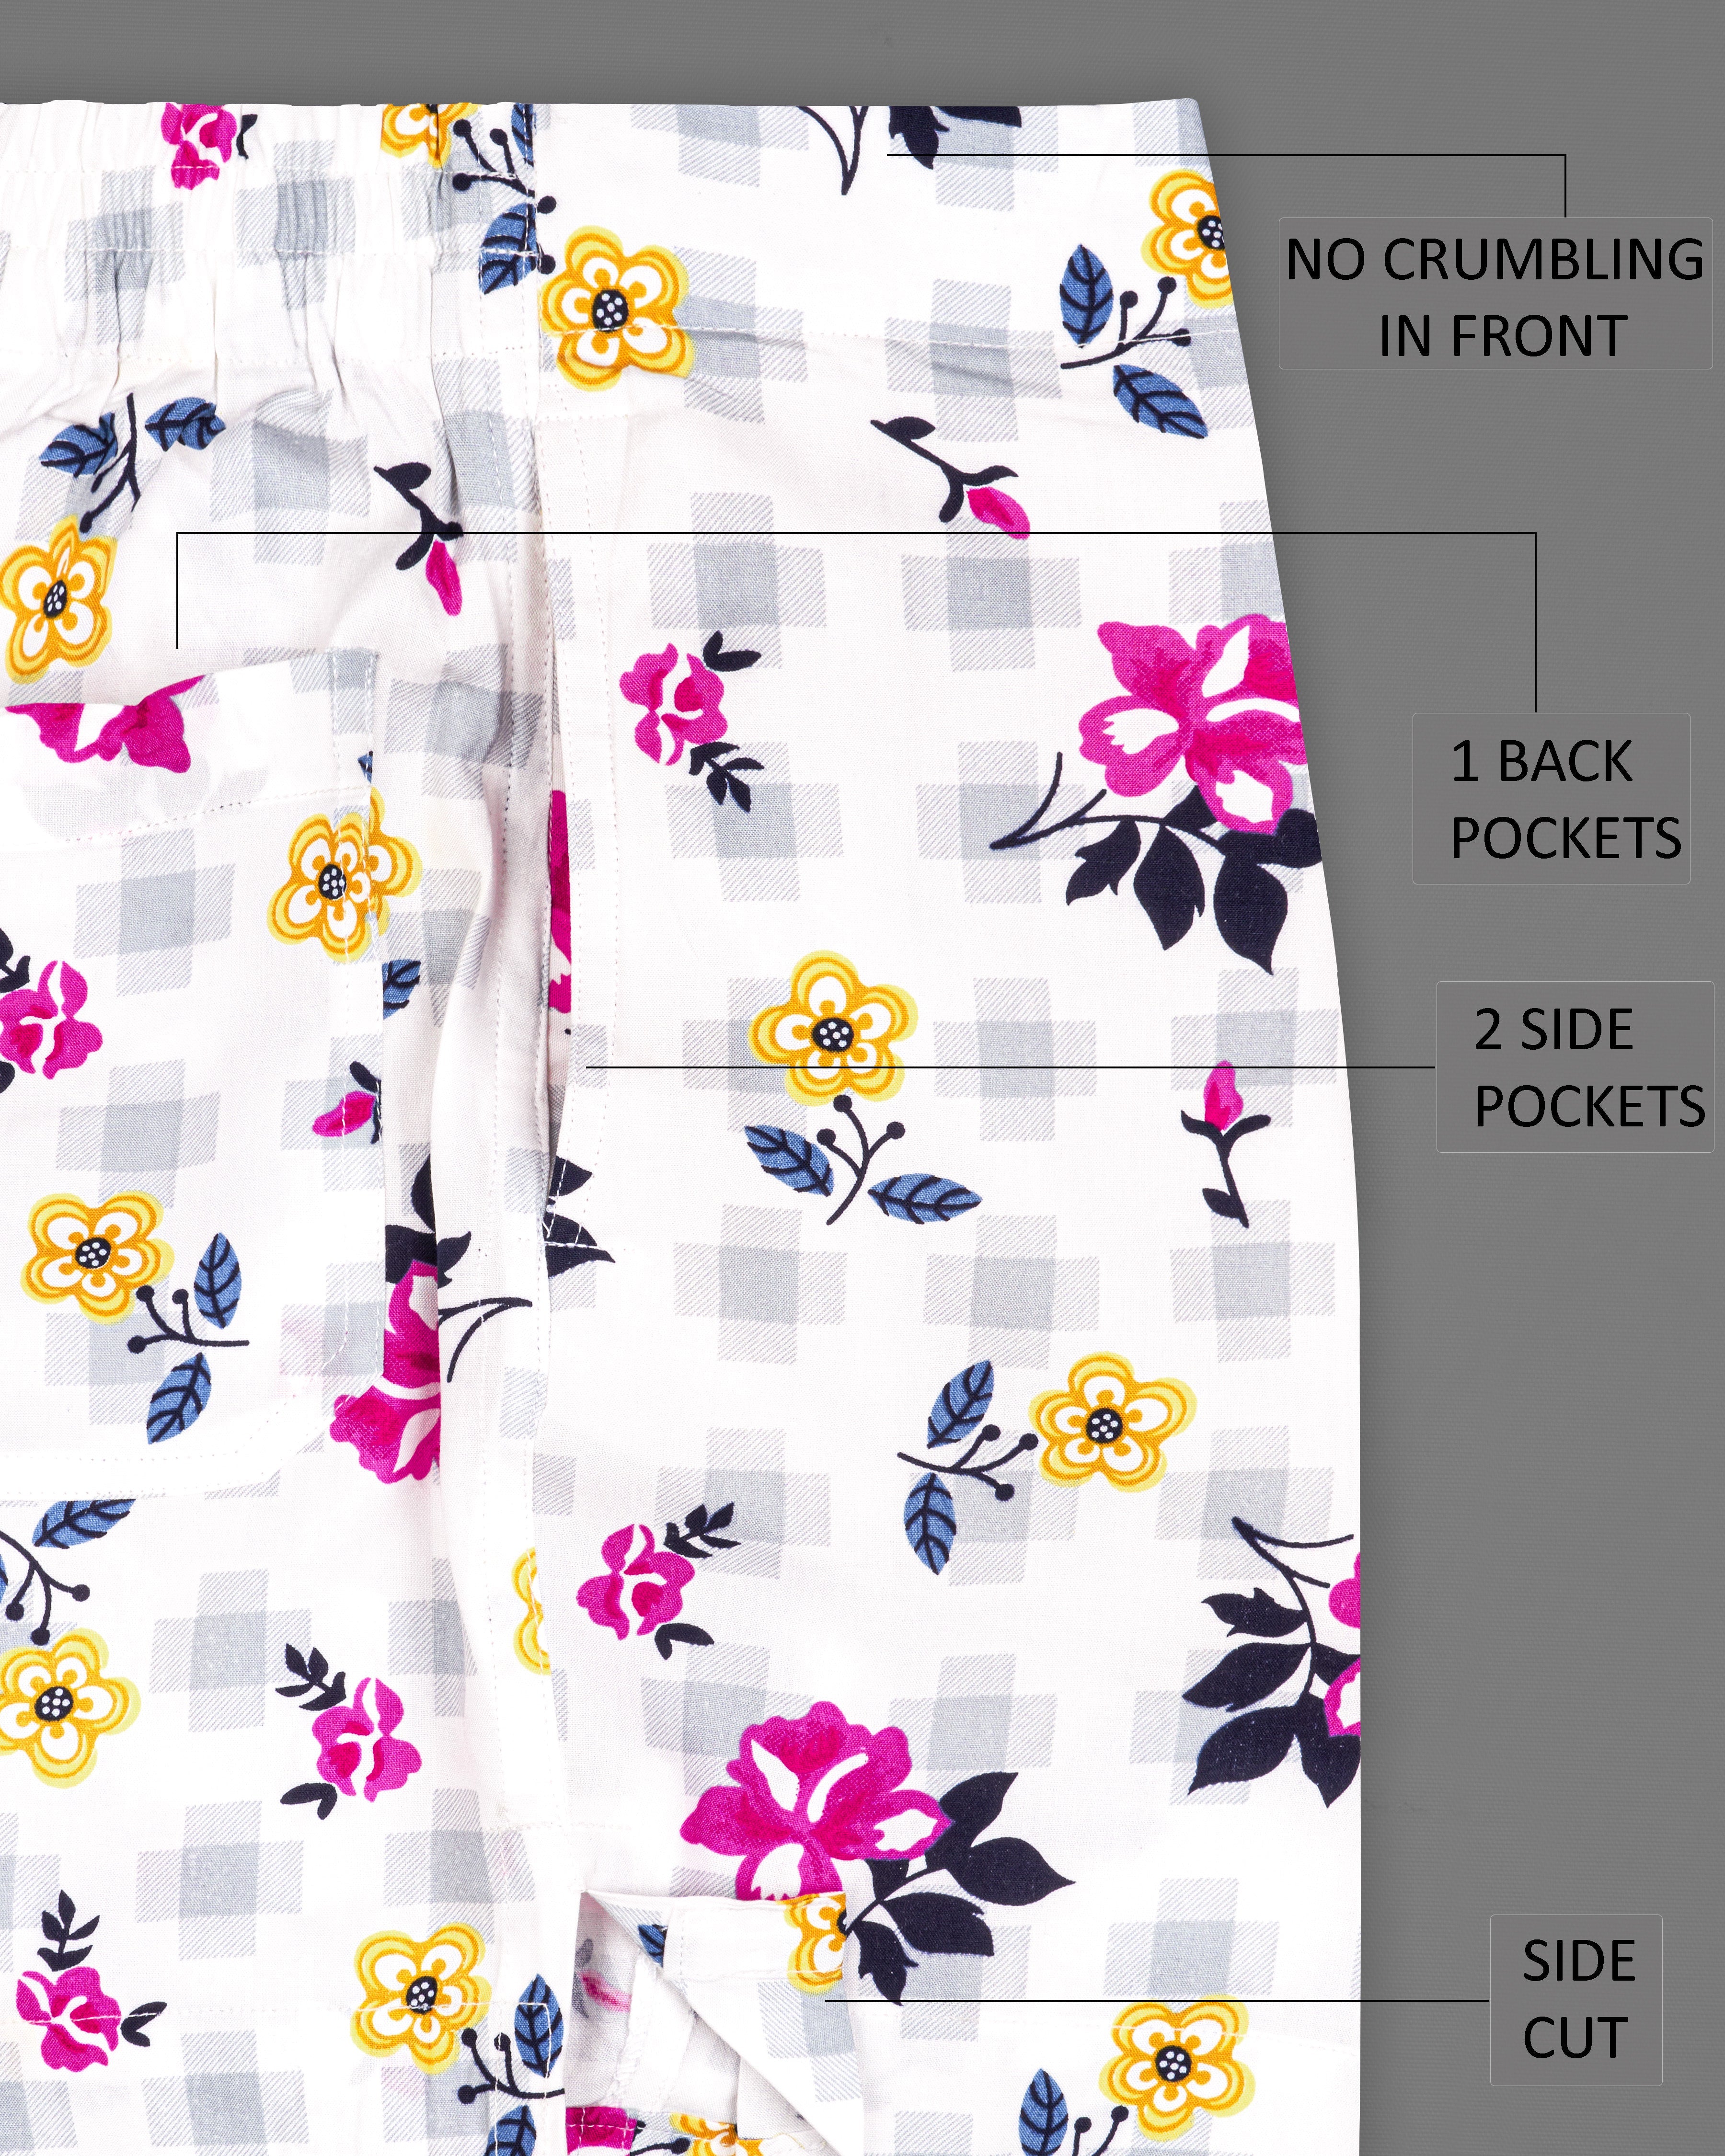 Bright White Floral Printed with Desert Storm Yellow Floral Printed Premium Cotton Boxers BX494-28, BX494-30, BX494-32, BX494-34, BX494-36, BX494-38, BX494-40, BX494-42, BX494-44